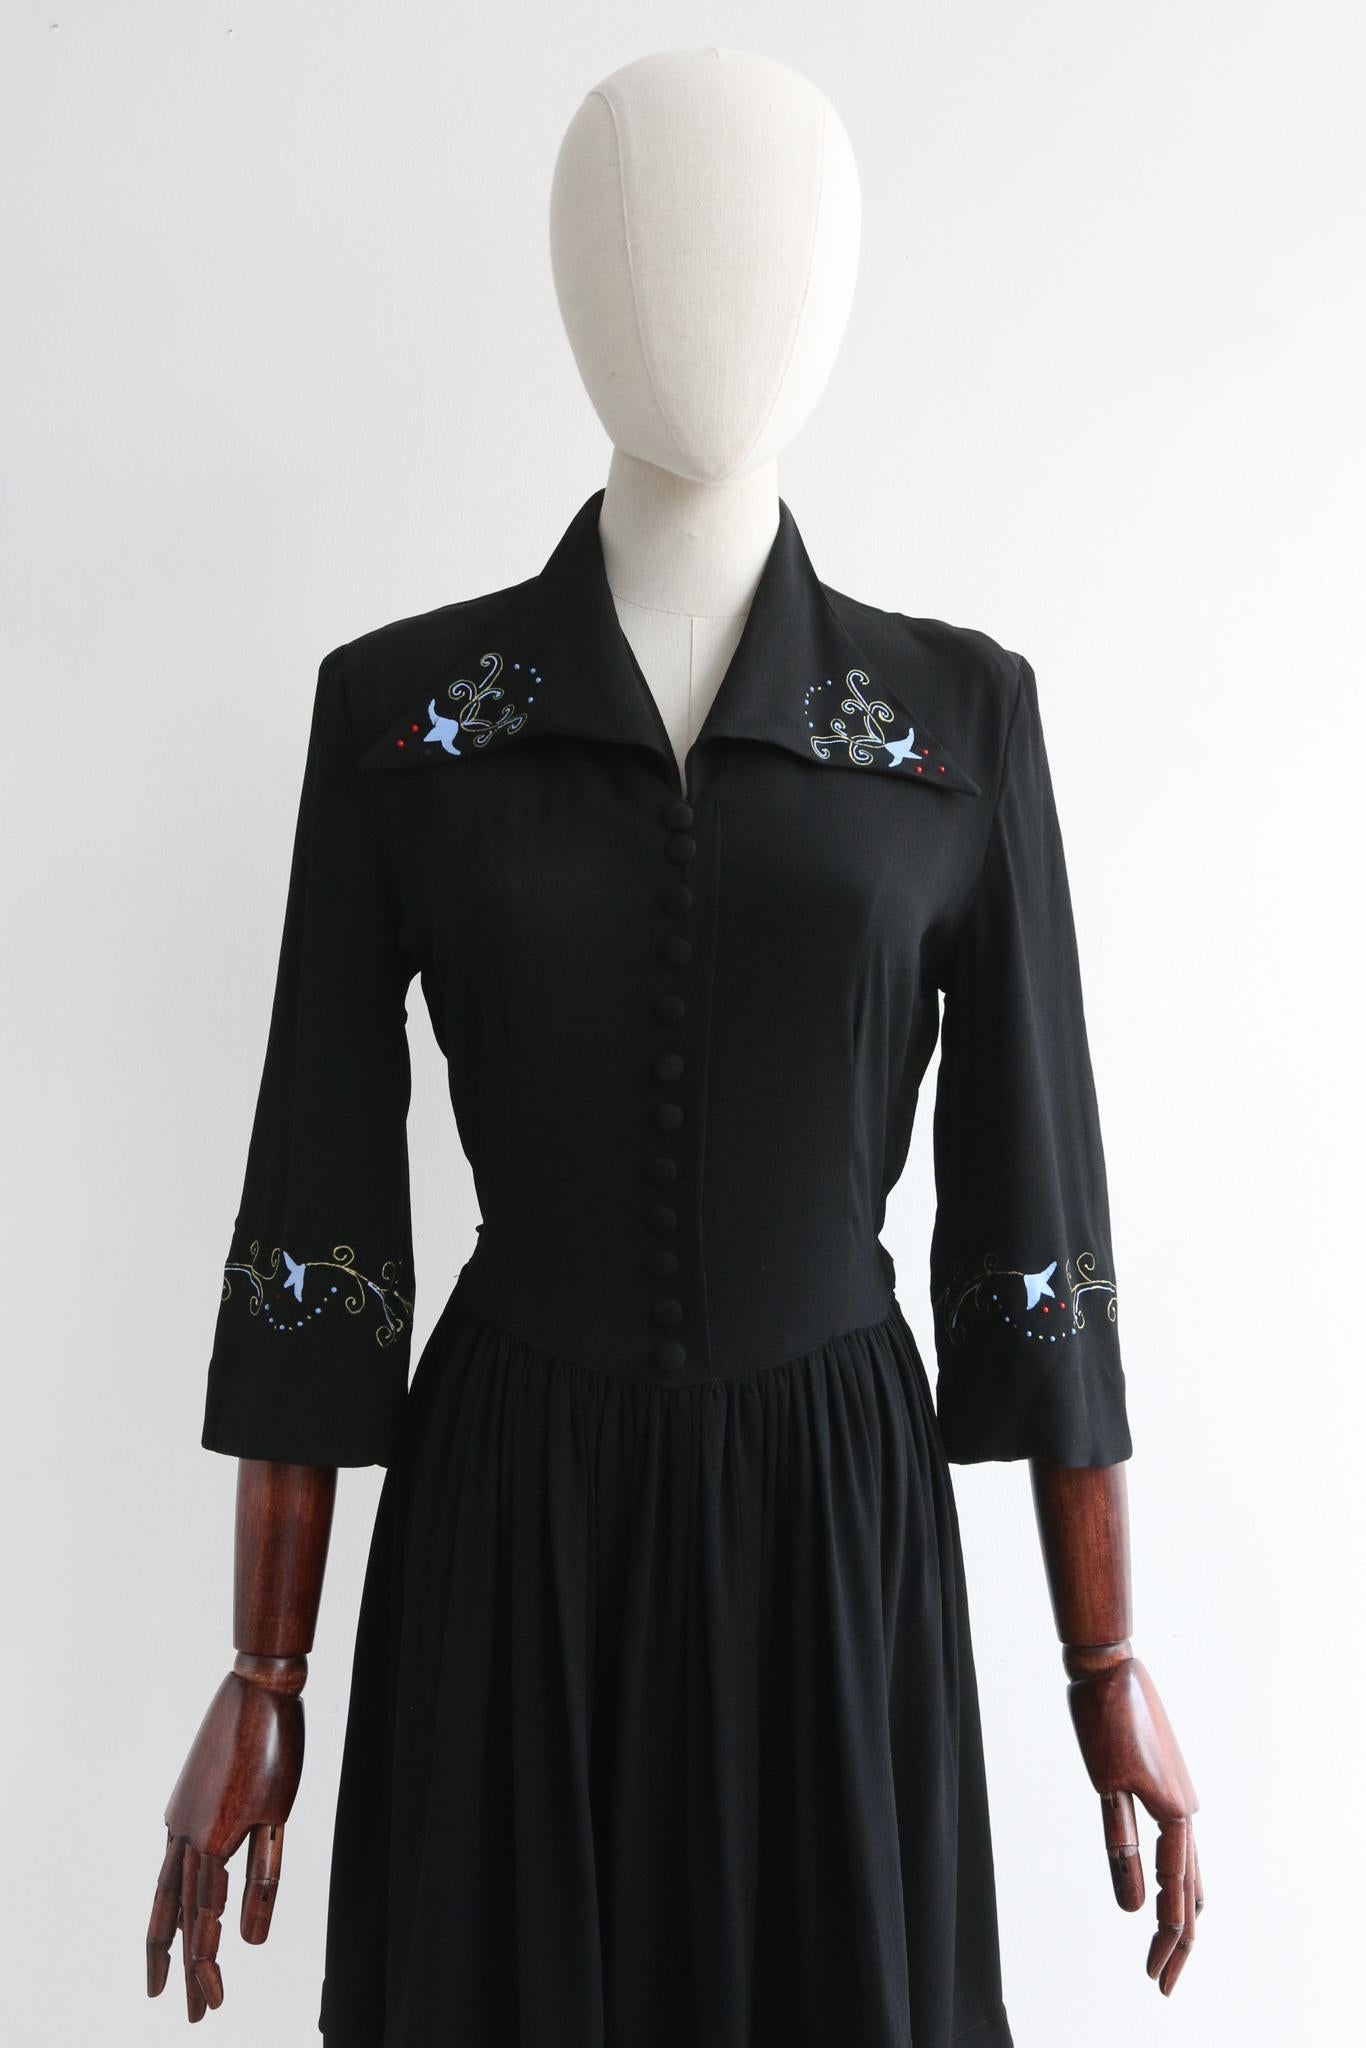 This truly breathtaking 1940's black crepe silk CC41 dress, with a hand painted and printed trailing pattern of blue bells and filigree decorative gold stems, is a rare piece to behold and never again find. 

Her V shaped neckline is framed by a